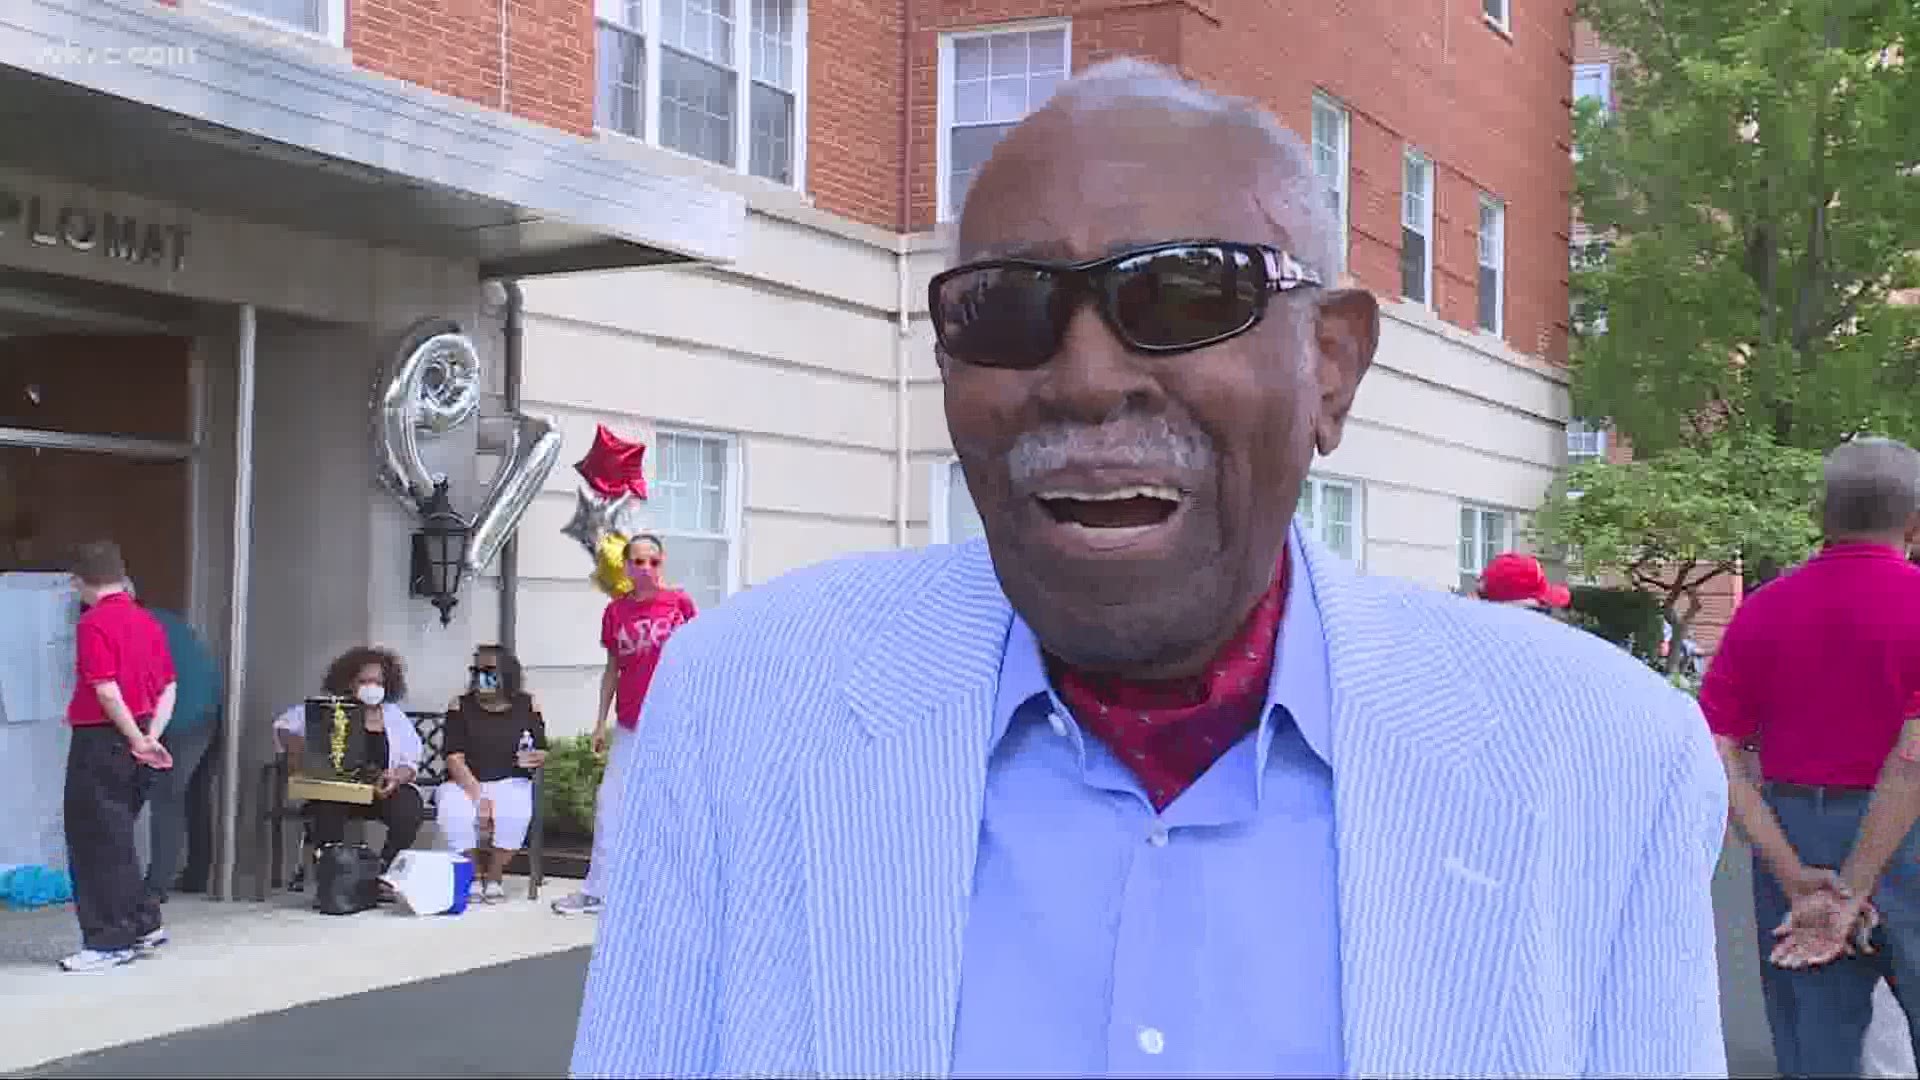 The big socially distant bash was for a 97 year old Cleveland man. But it's what this veteran has done in his almost century of living - that may have you - celebra